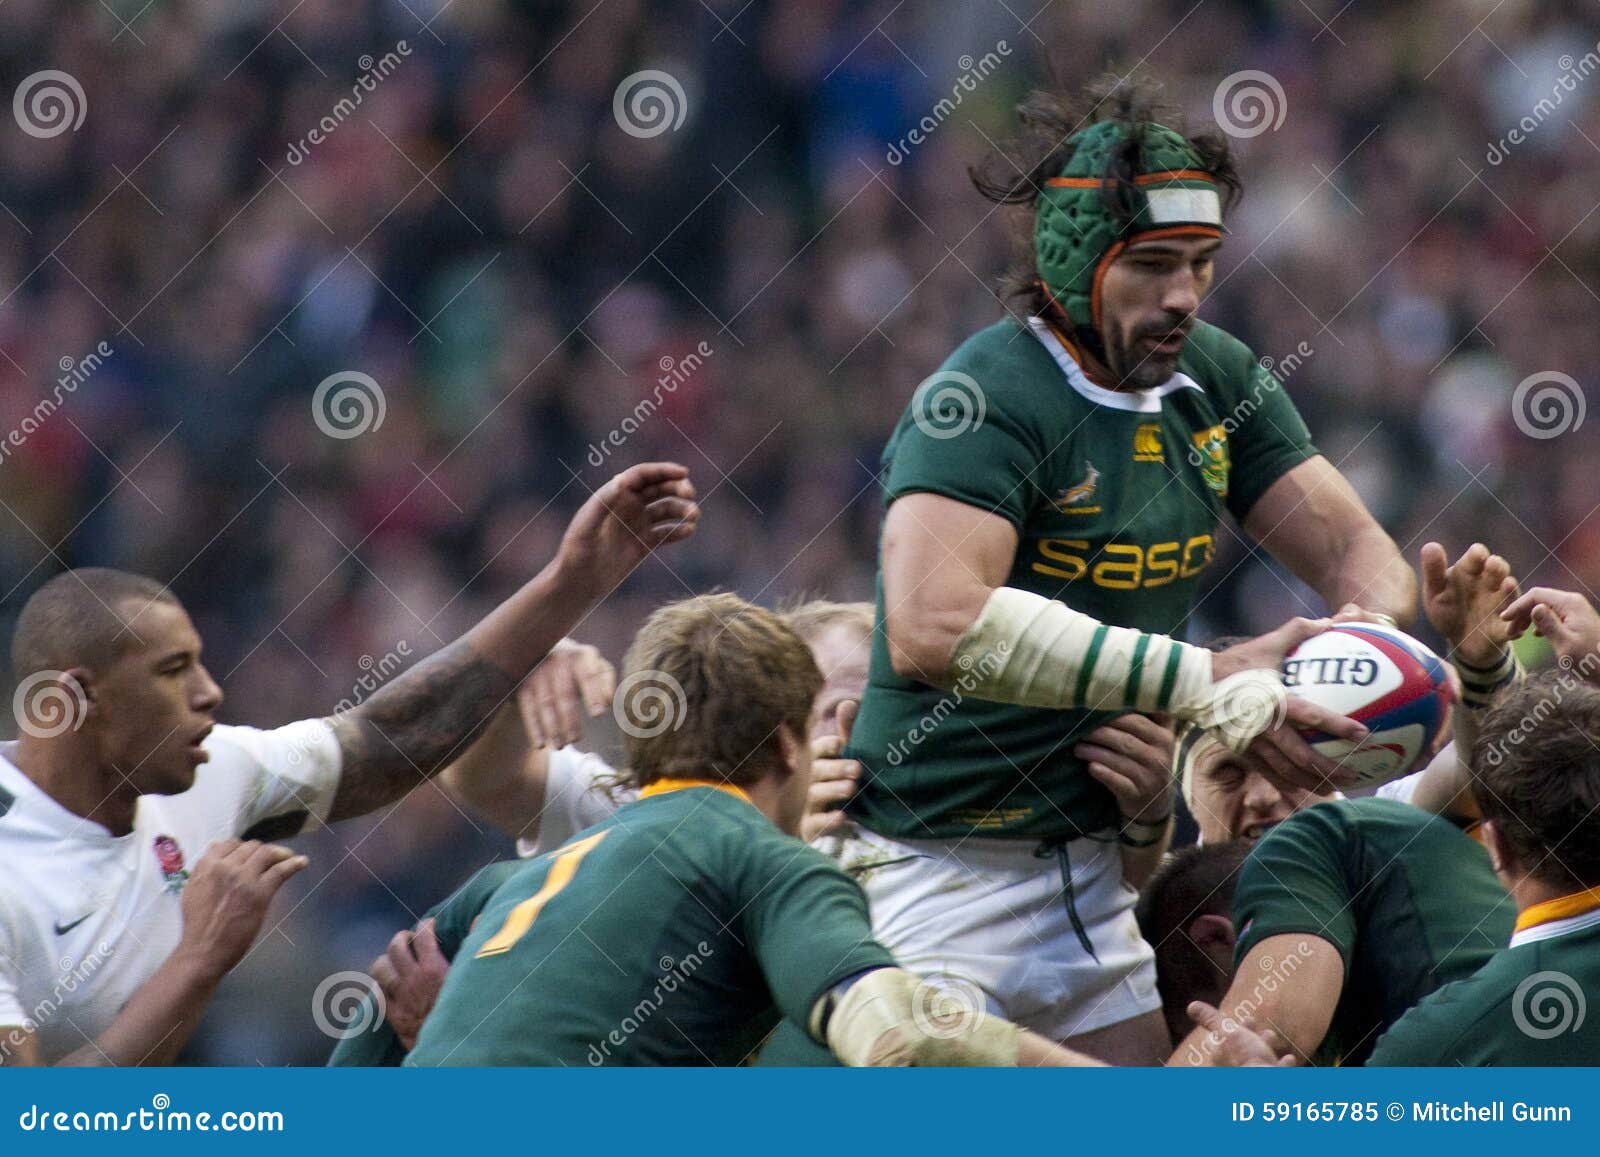 GBR Rugby Union England Vs South Africa Editorial Image